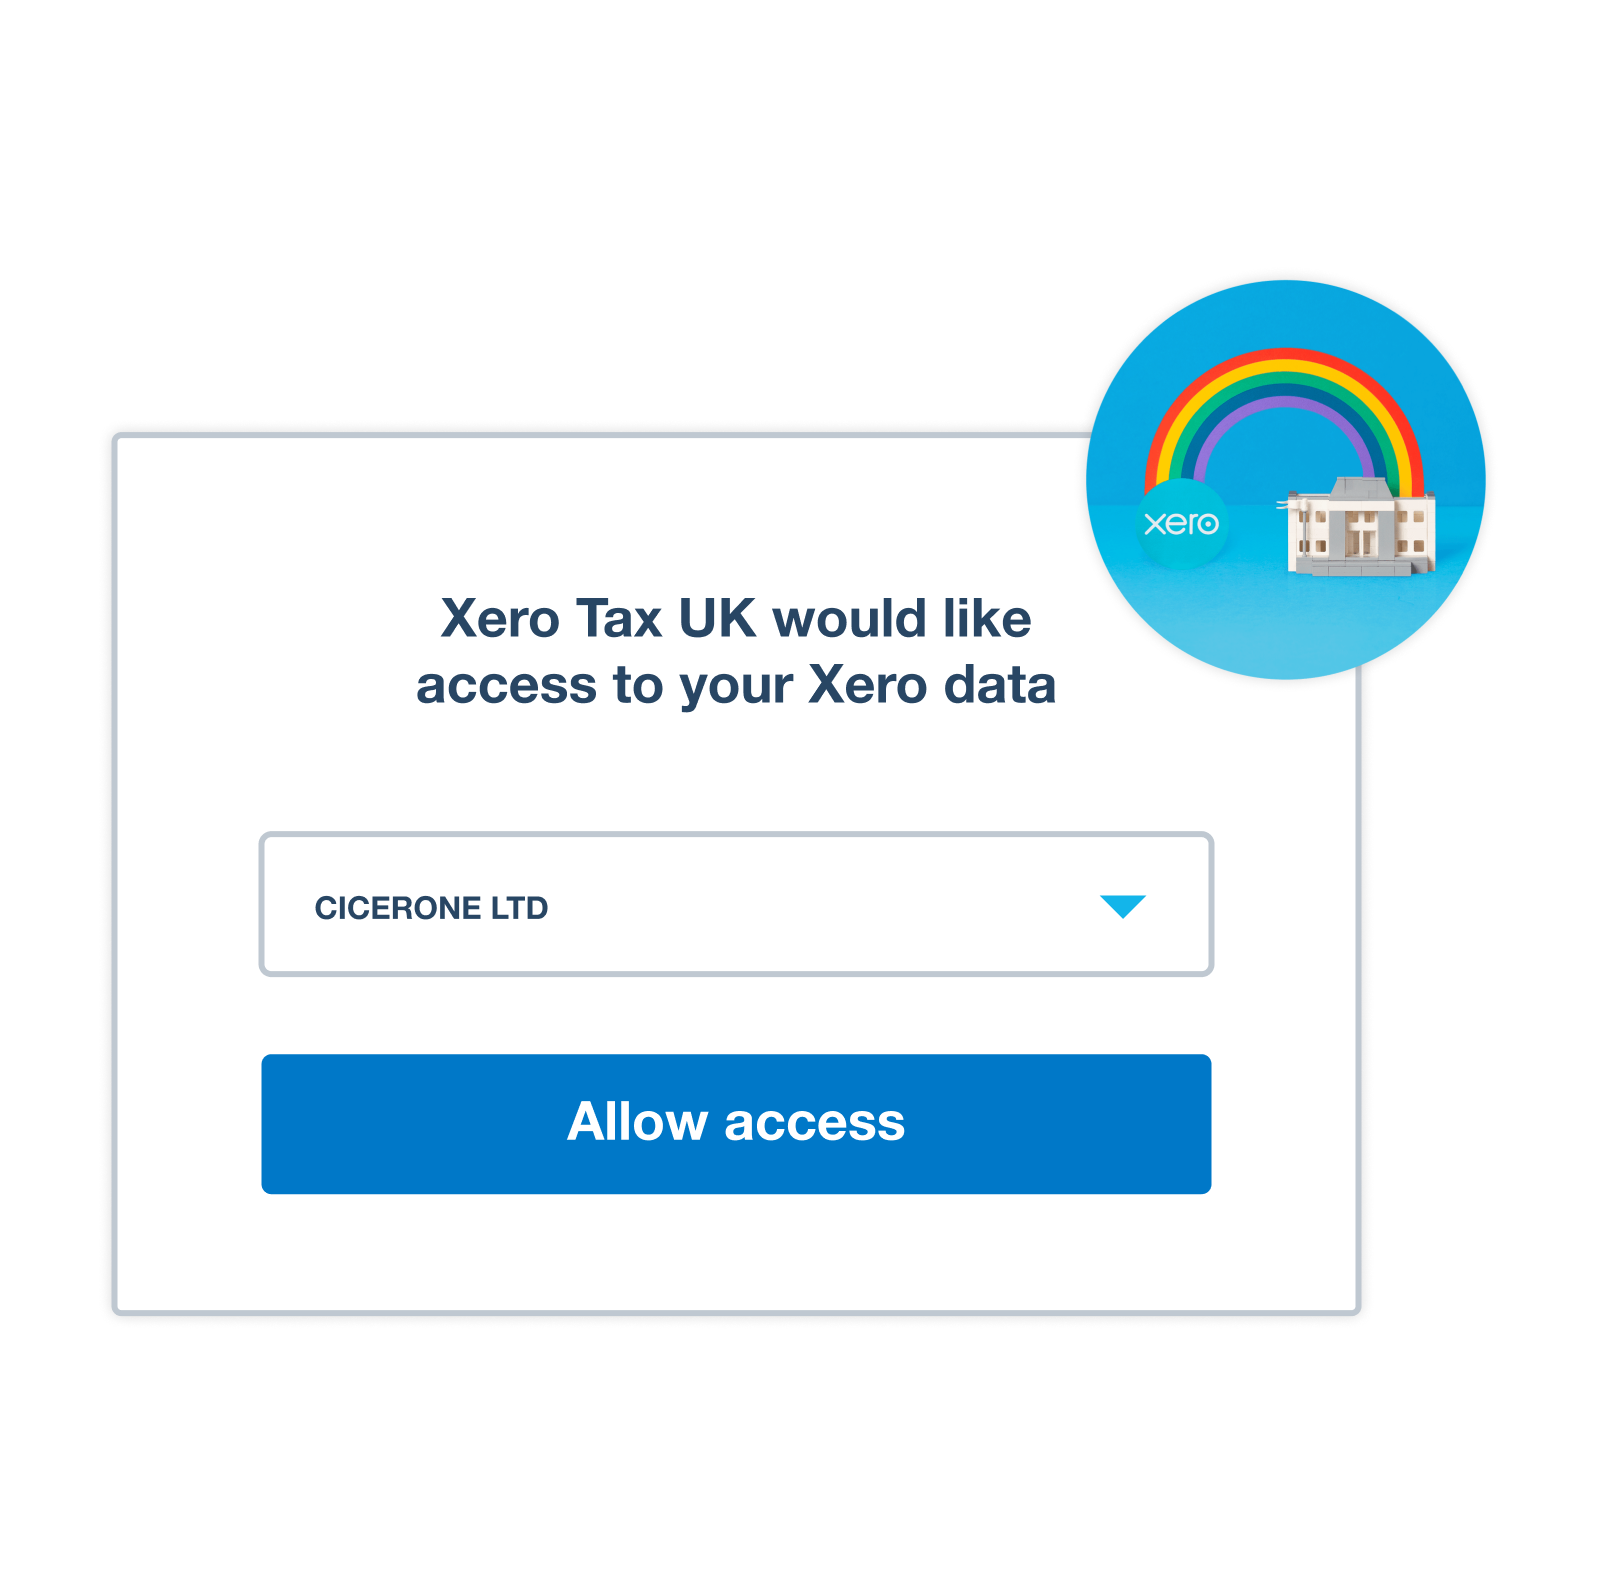 A message displays to a business owner requesting permission for Xero Tax to access the businesses’s Xero data.